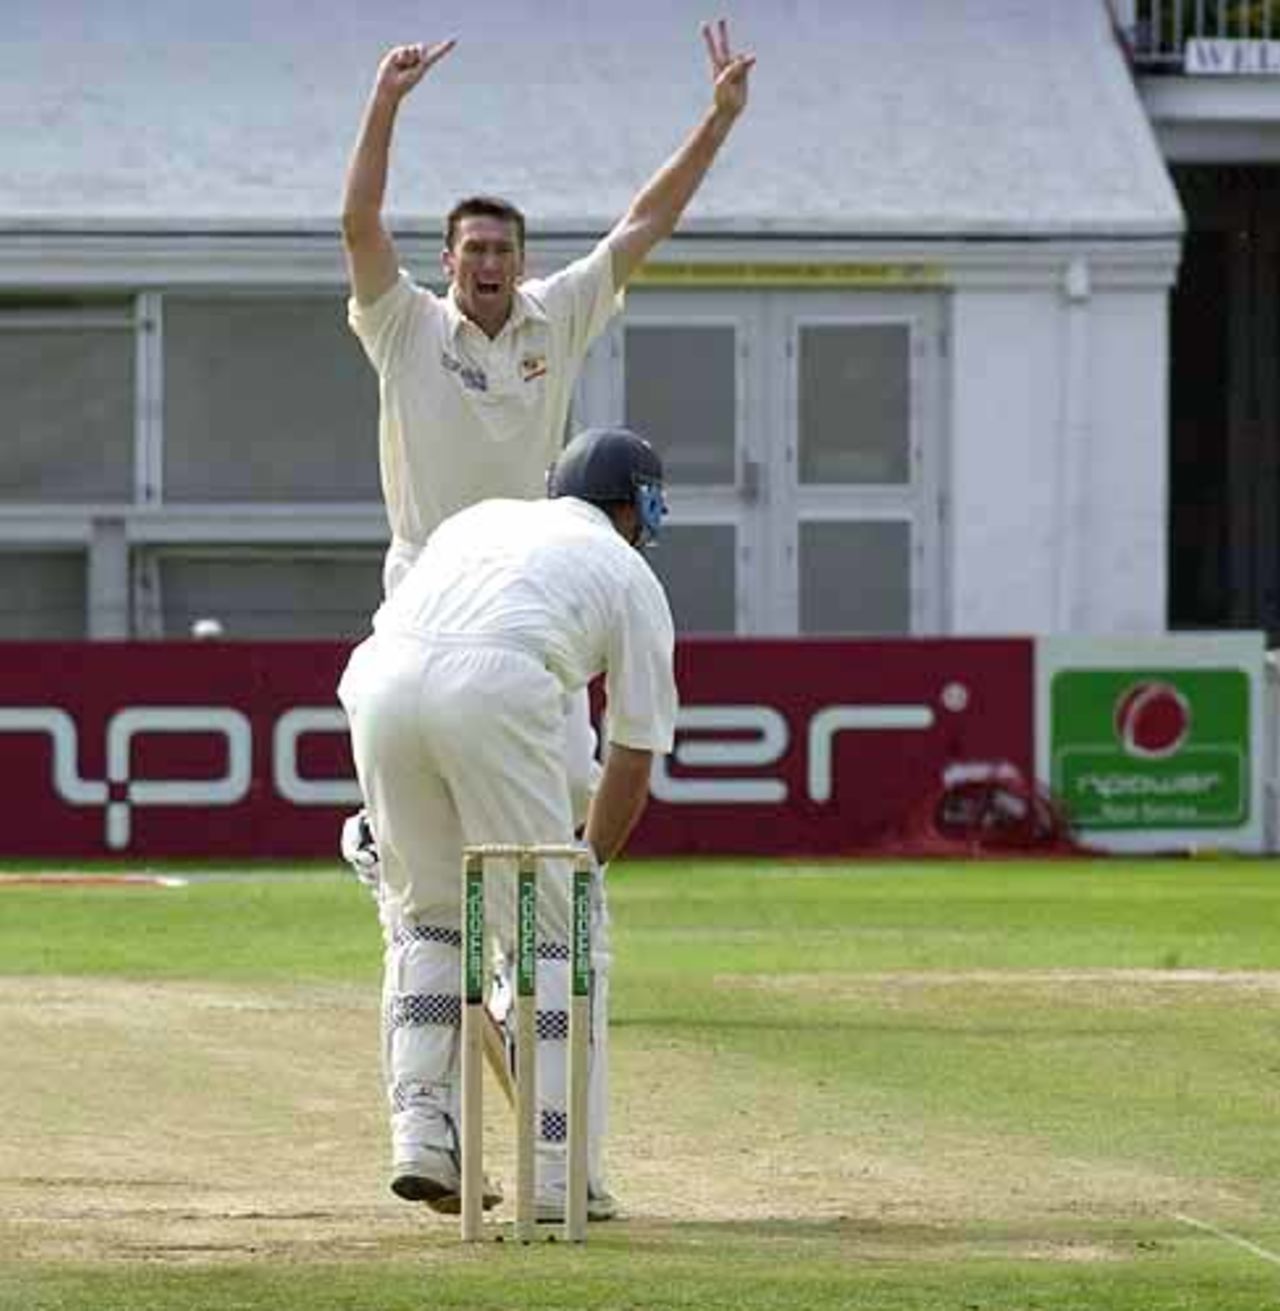 Glenn McGrath traps England skipper Hussain lbw in his first bowling spell of the third day, England v Australia, The Ashes 4th npower Test, Leeds, 16-20 Aug 2001